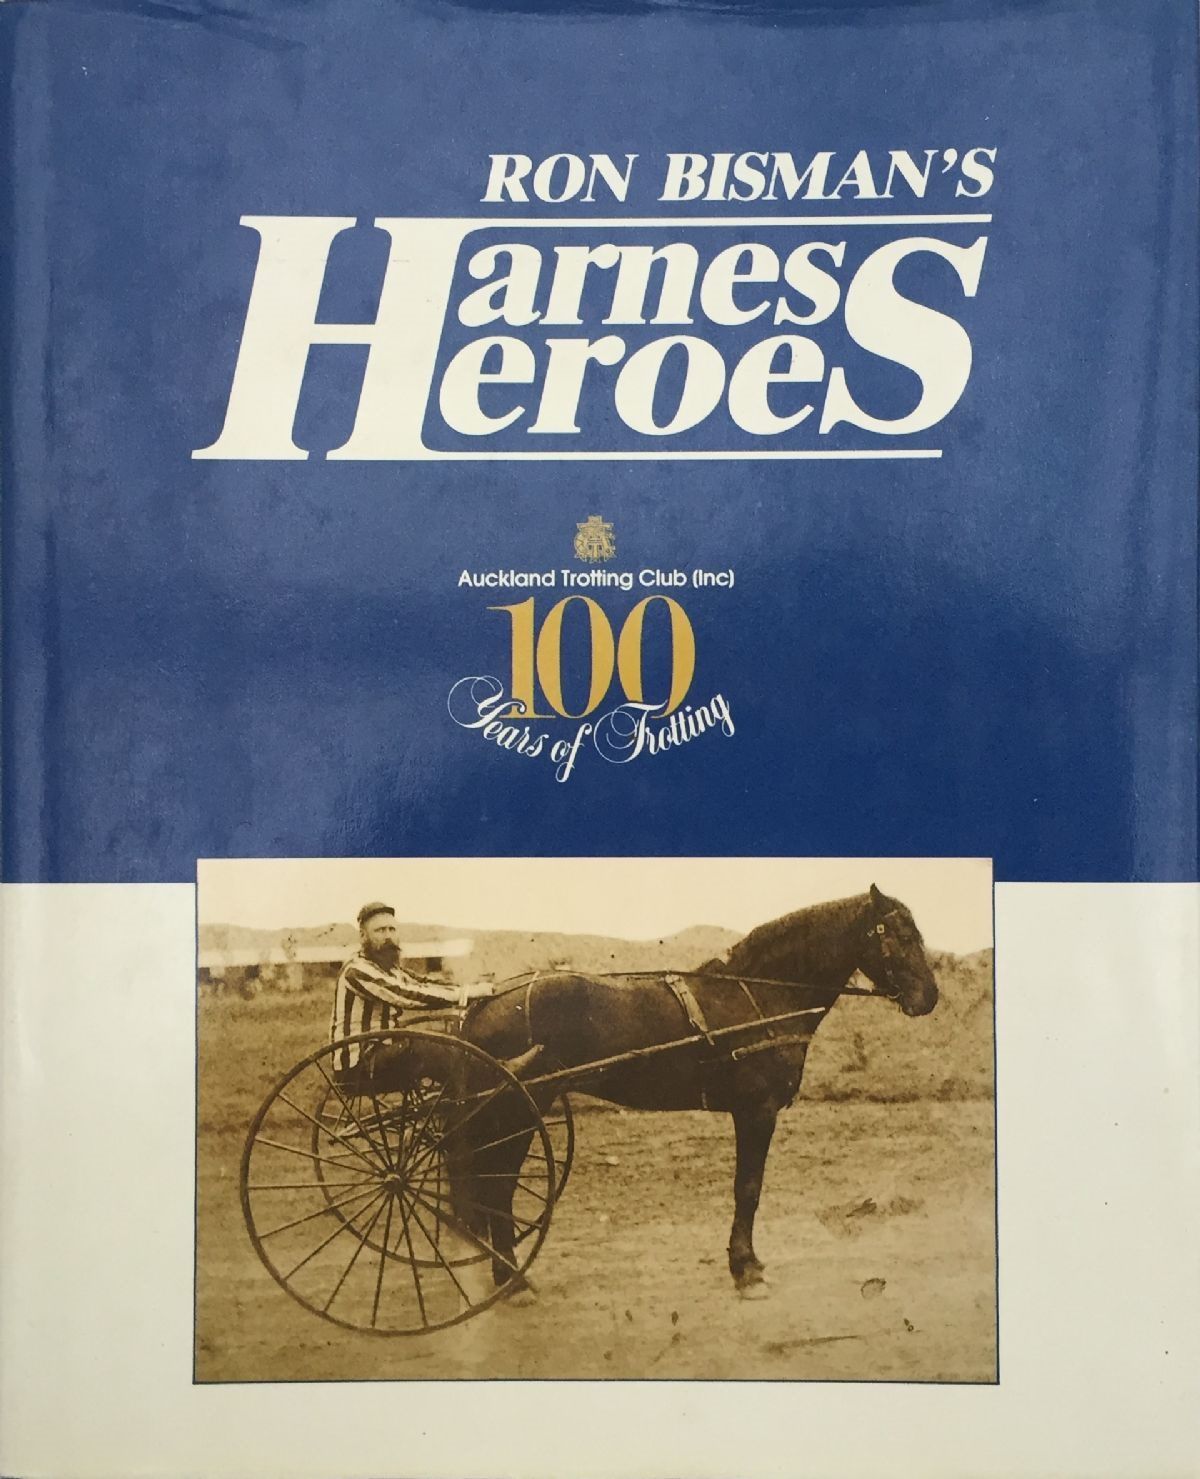 RON BISMAN'S HARNESS HEROES: Auckland Trotting Club